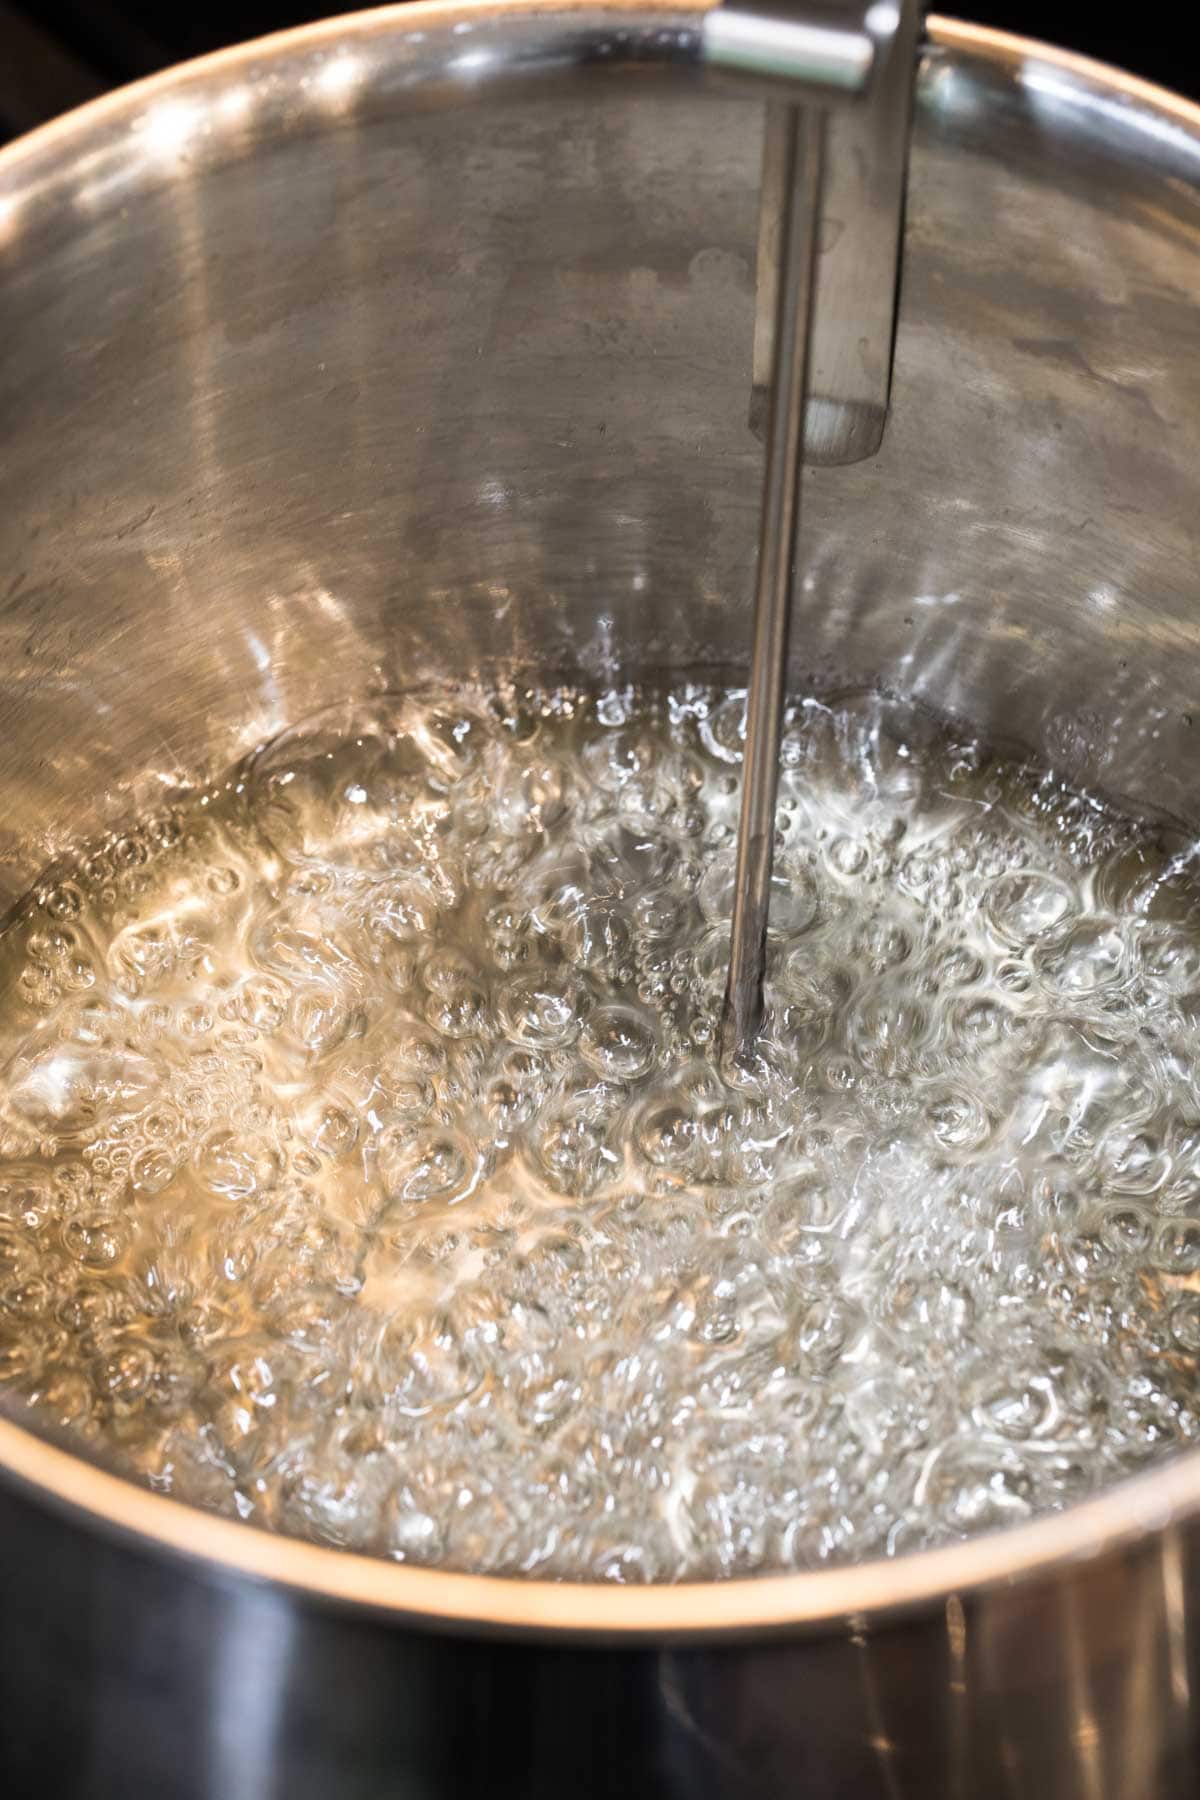 Candy mixture boiling in a stainless steel pot.